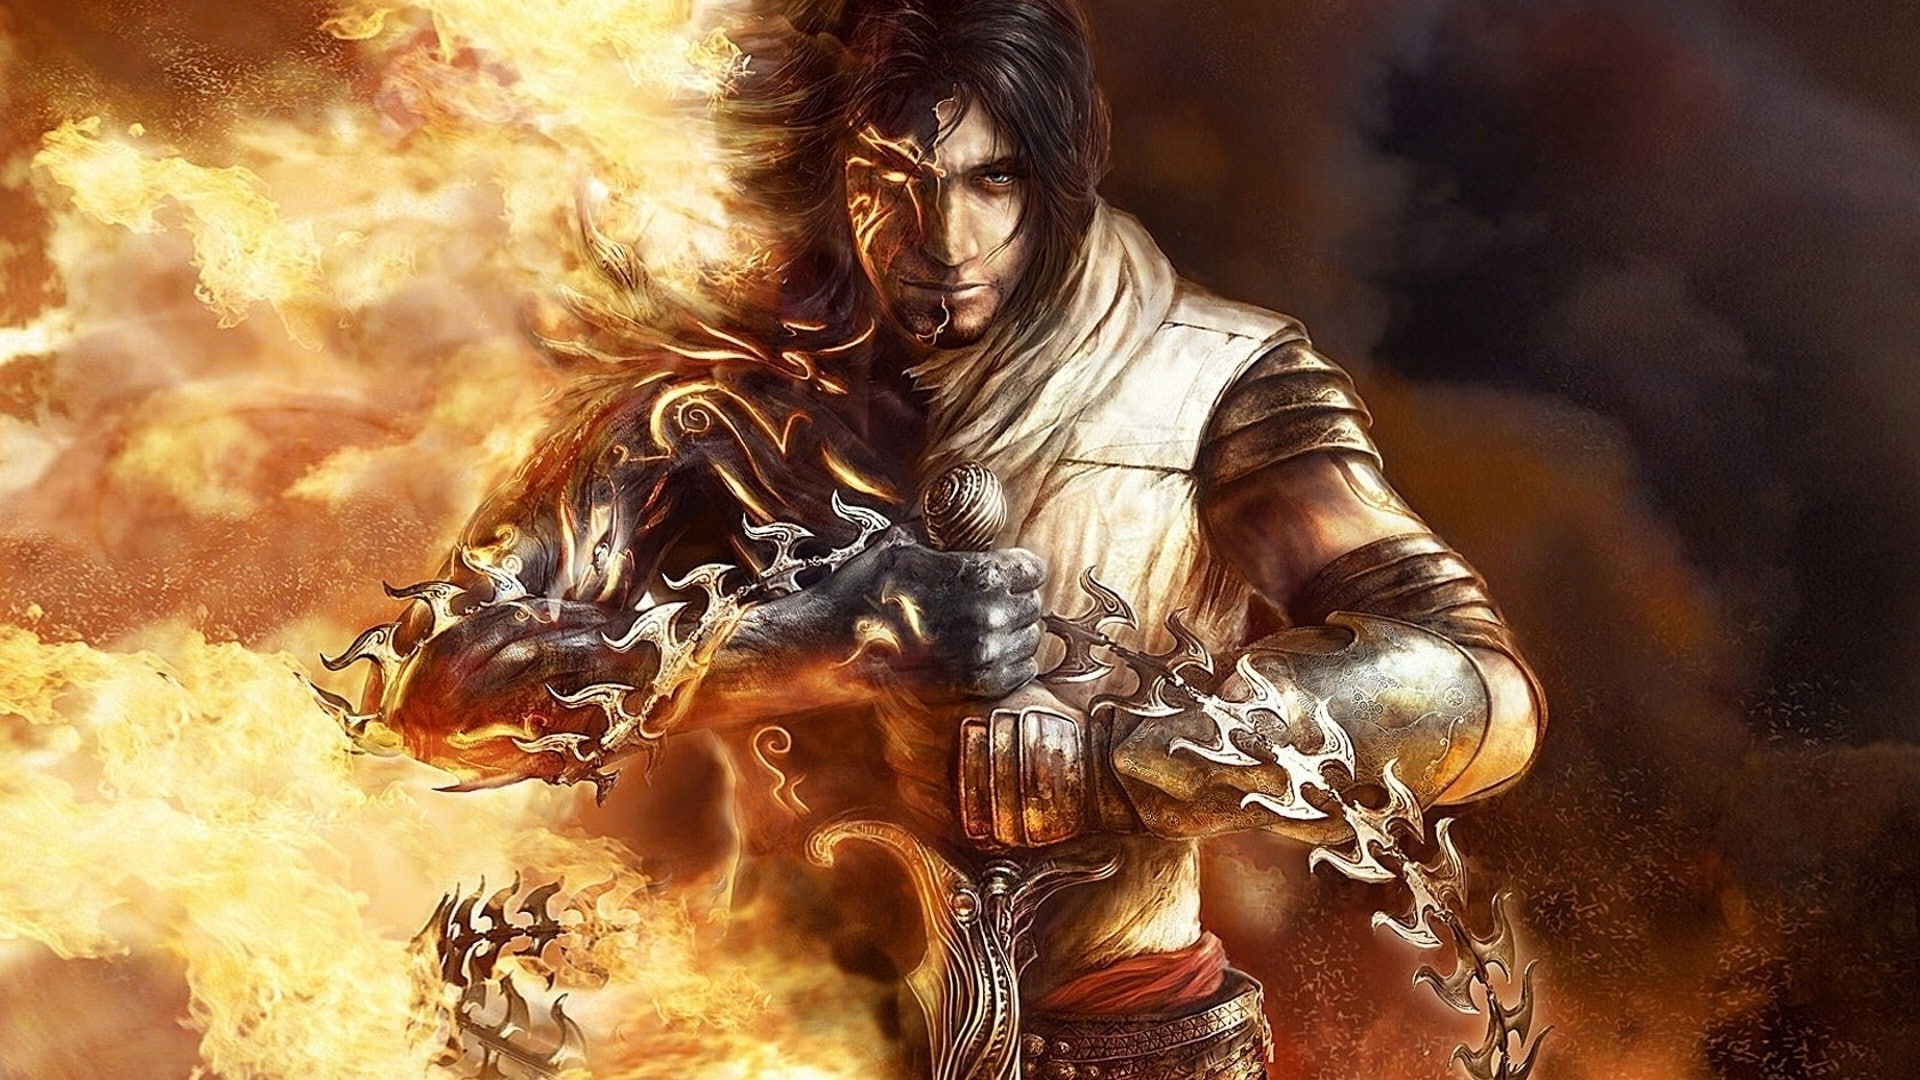 armor, fantasy Art, fire, Heroes, men, prince of persia, Prince Of Persia: The Two Thrones